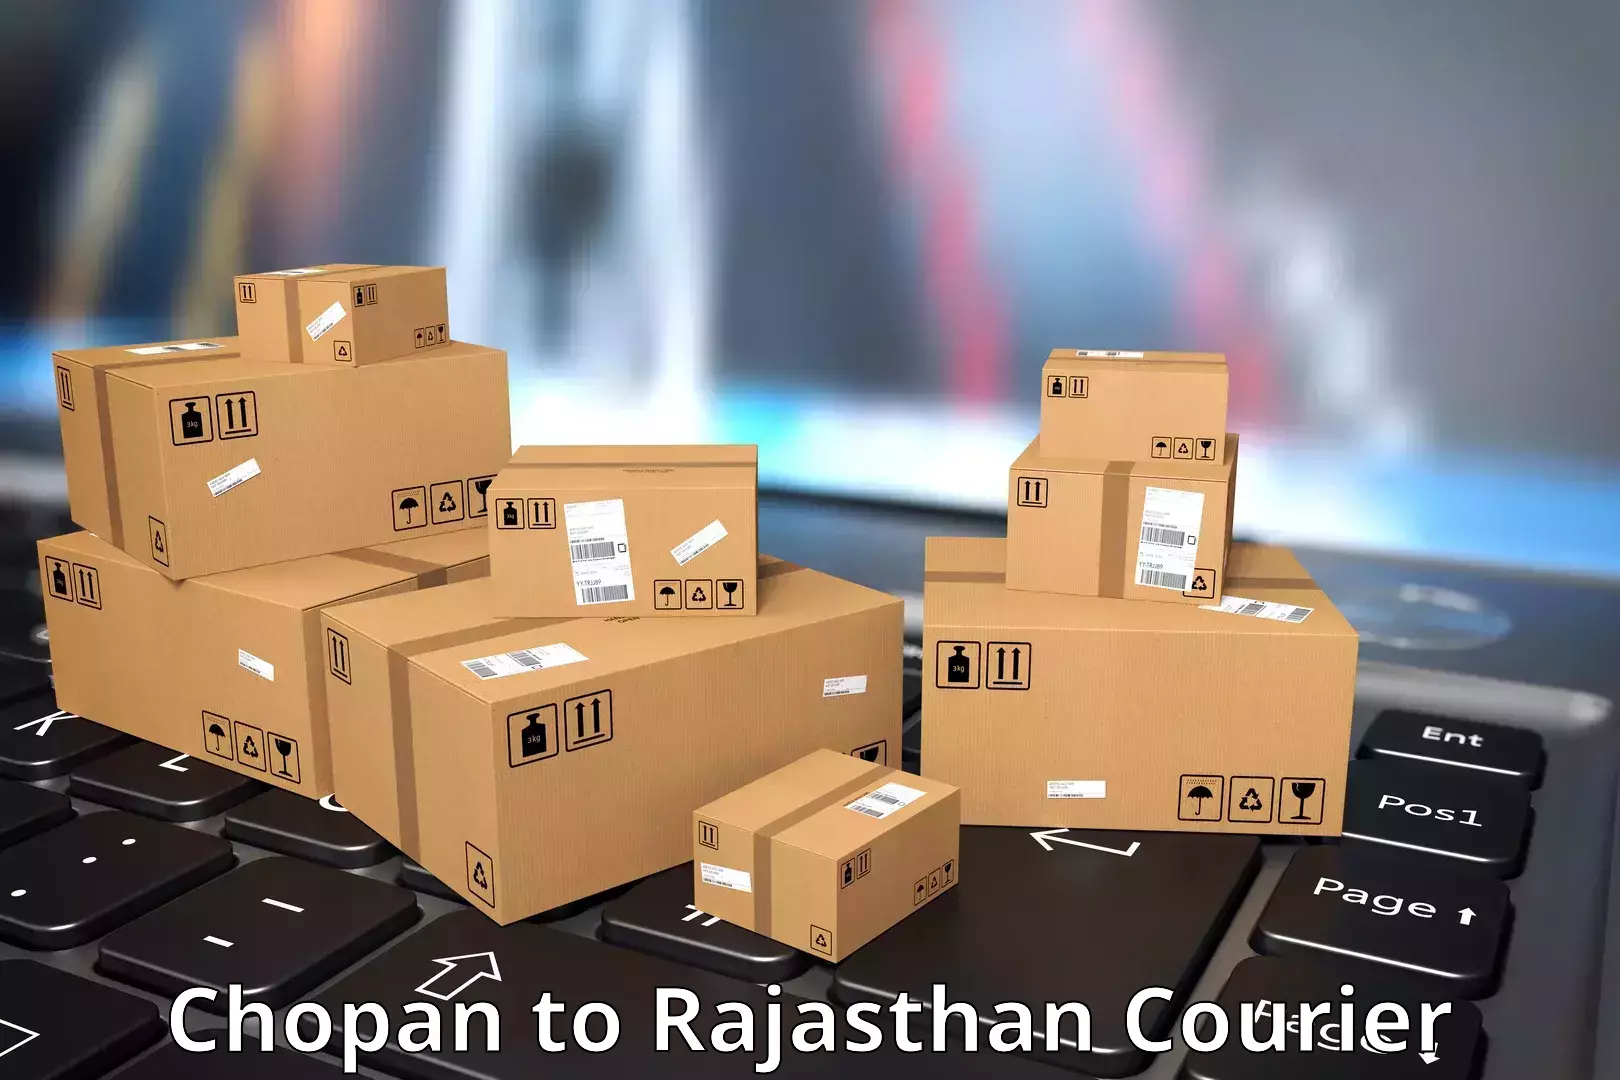 Parcel service for businesses Chopan to Parbatsar